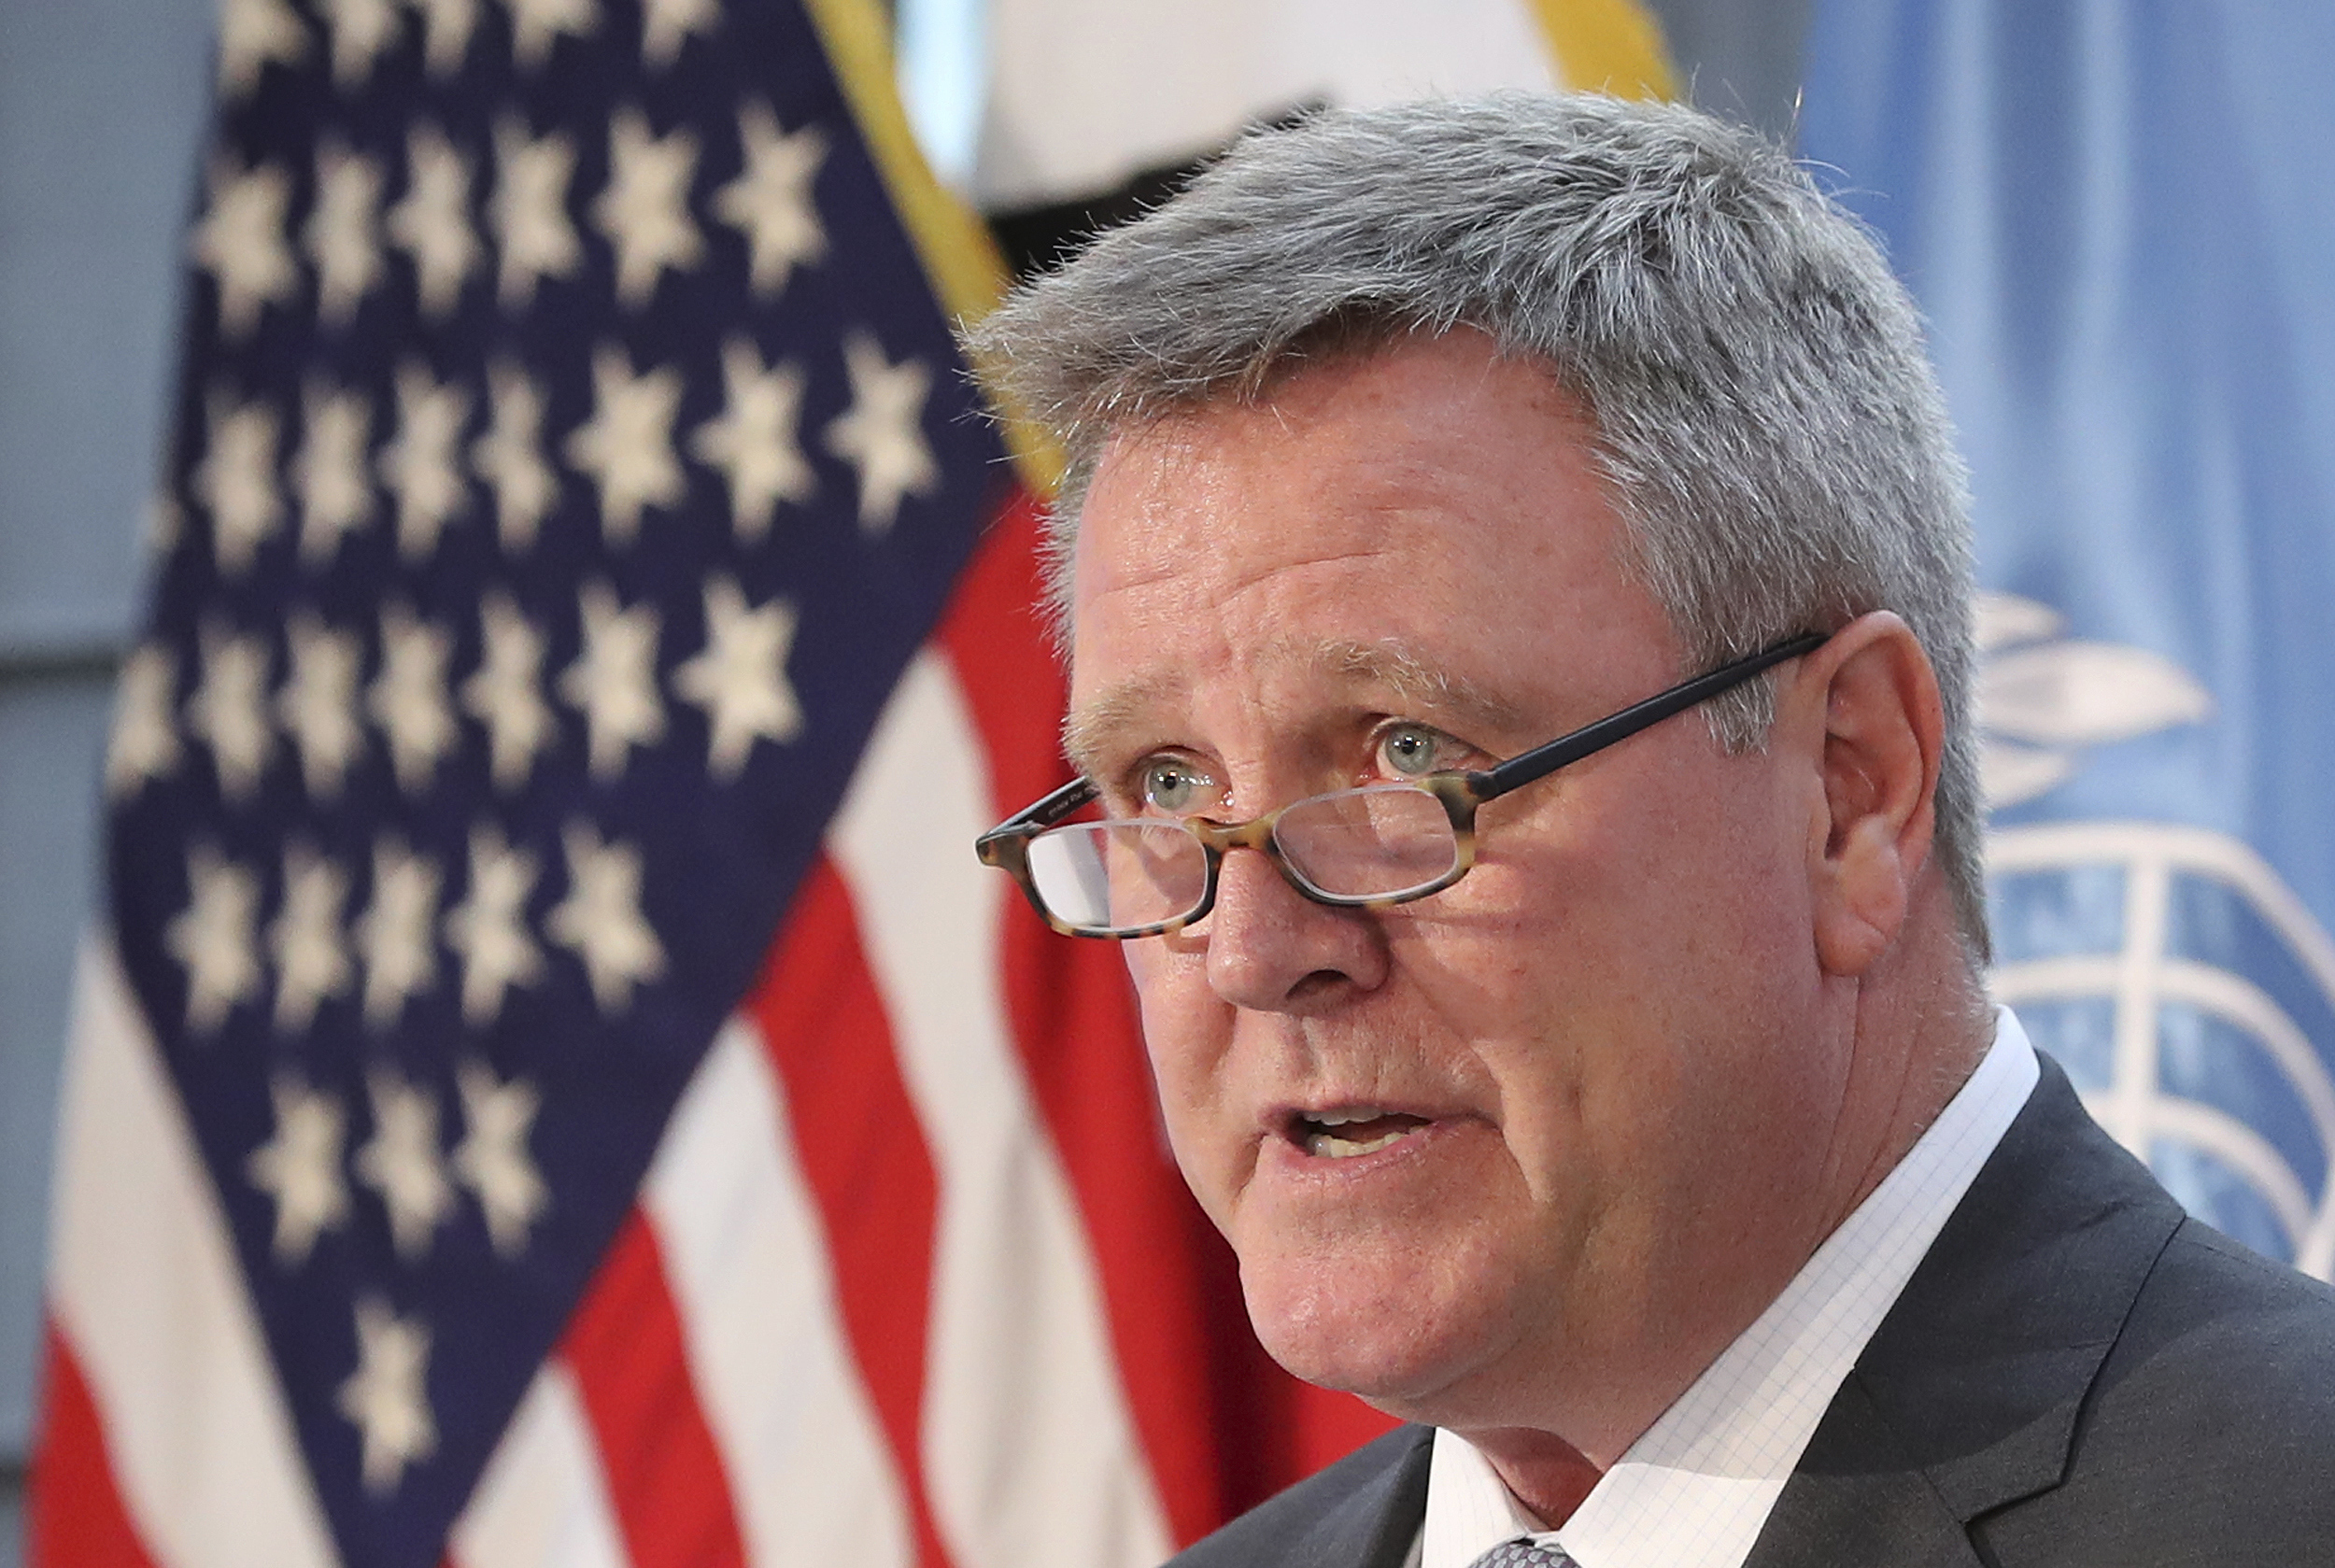 In this Aug. 1, 2017 file photo, U,S, Olympic Committee CEO Scott Blackmun speaks about the Team USA WinterFest for the upcoming 2018 Pyeongchang Winter Olympic Games.